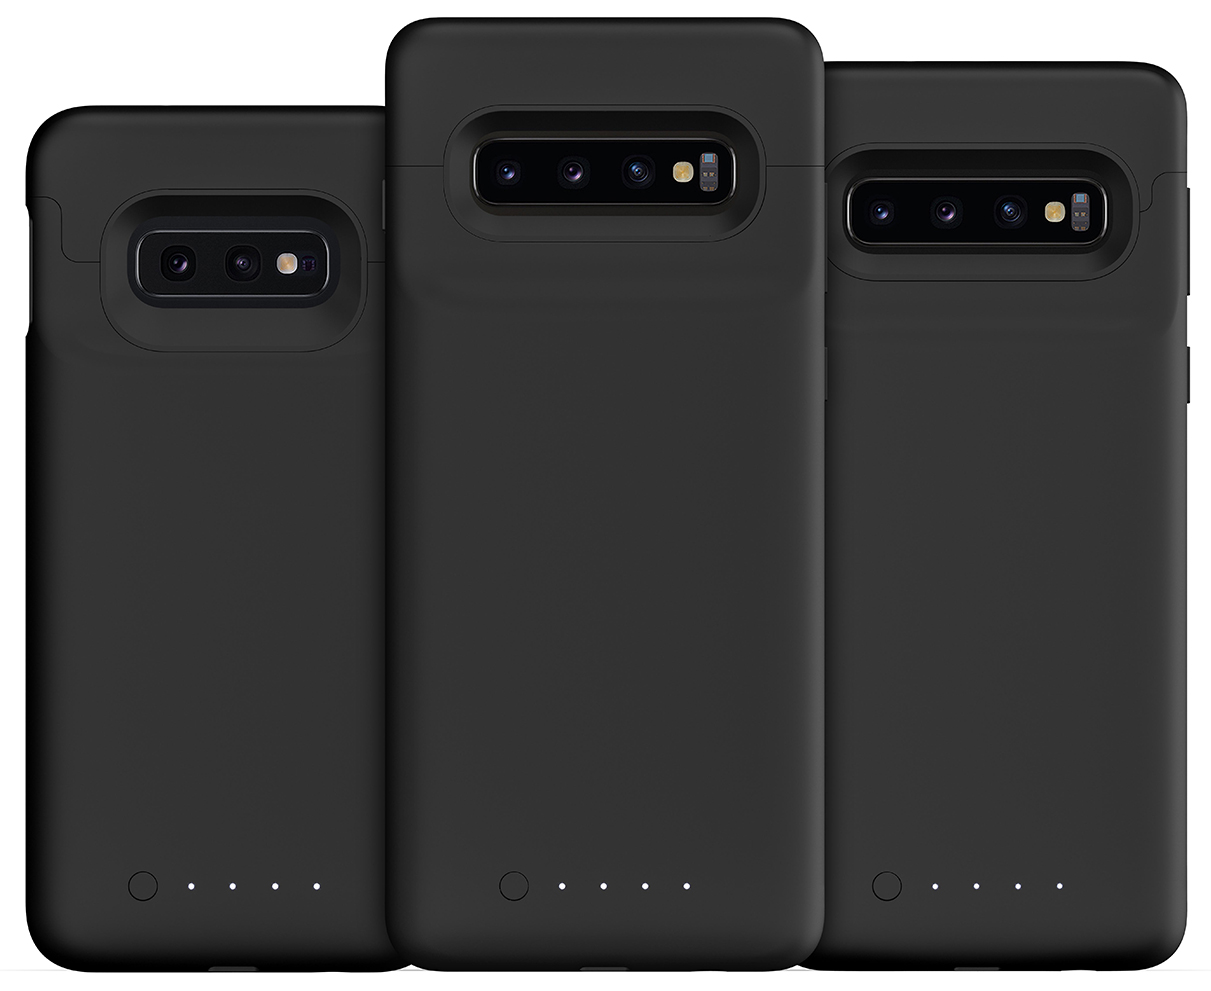 S10 Mophie cases